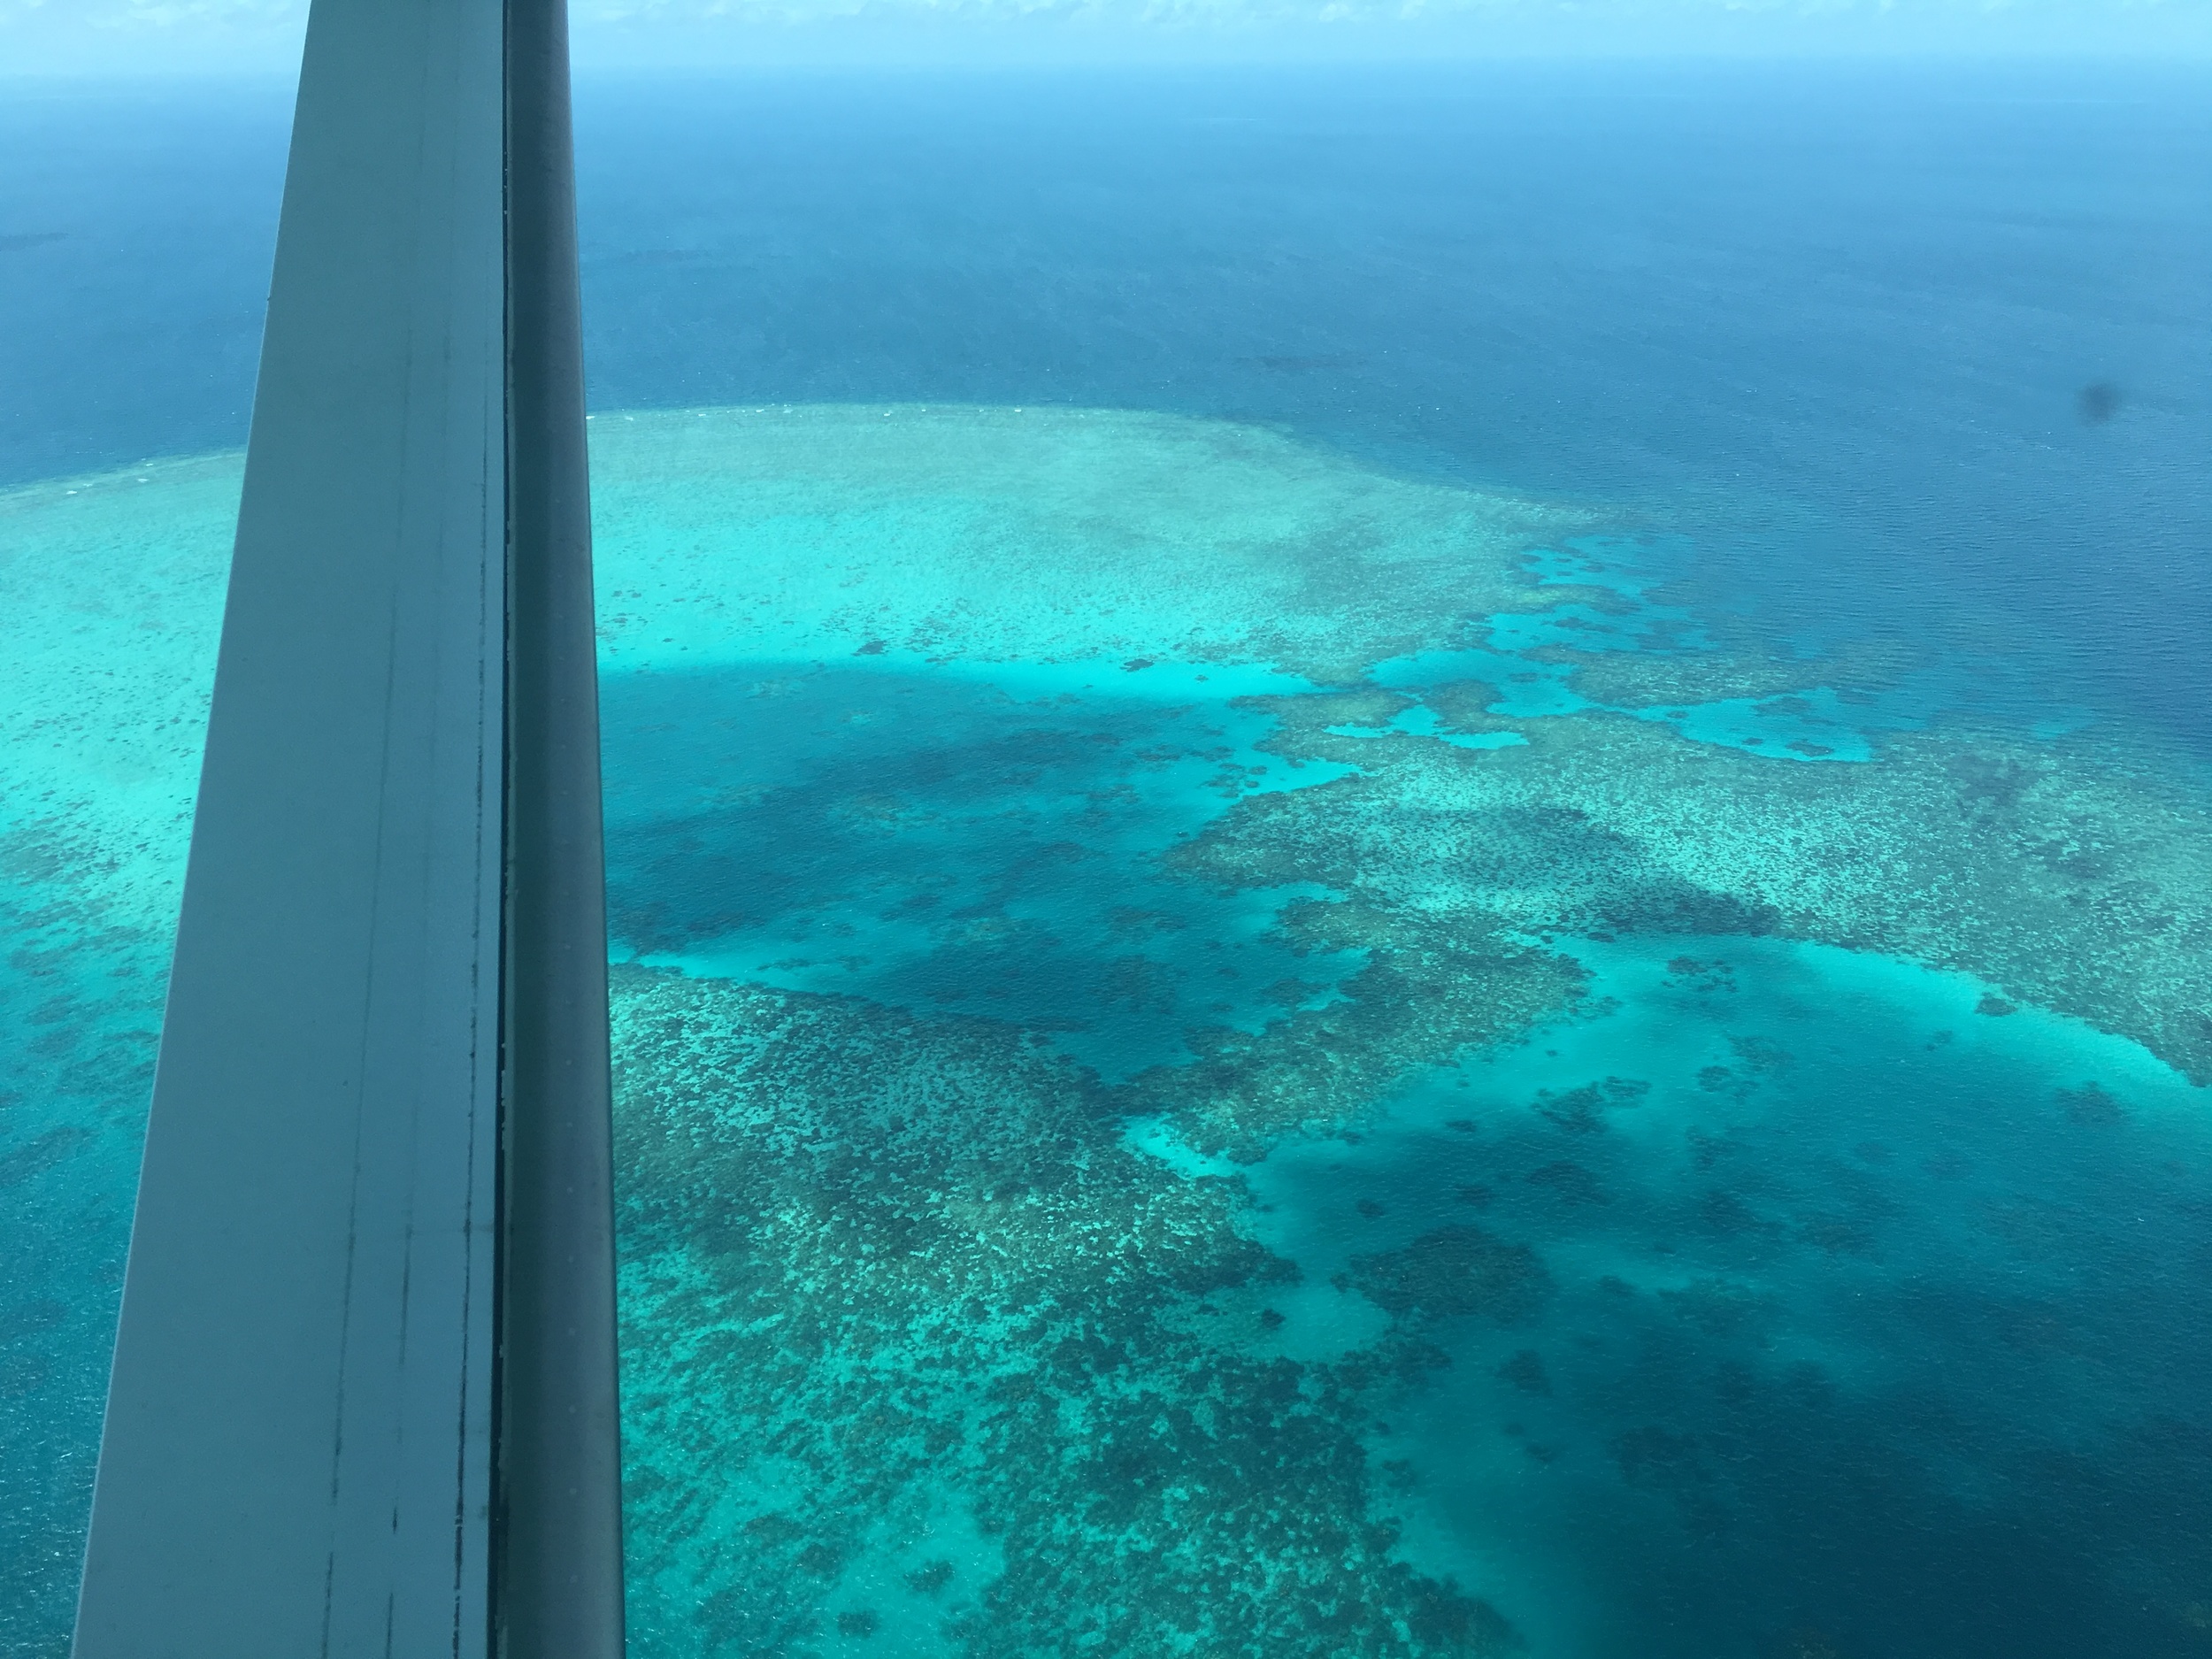 GBR from the plane